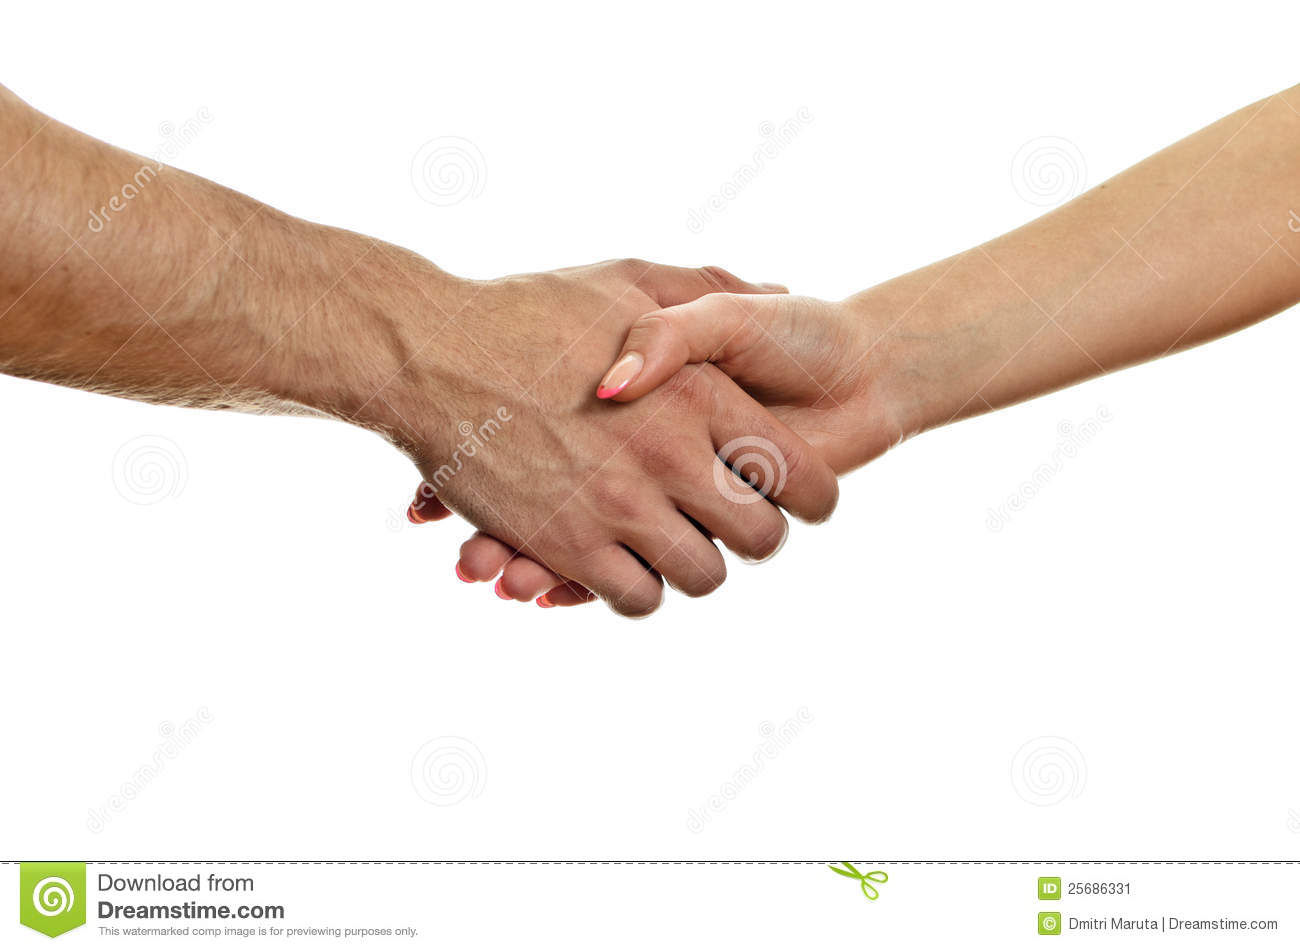 Man And Woman Shaking Hands  Stock Image   Image  25686331